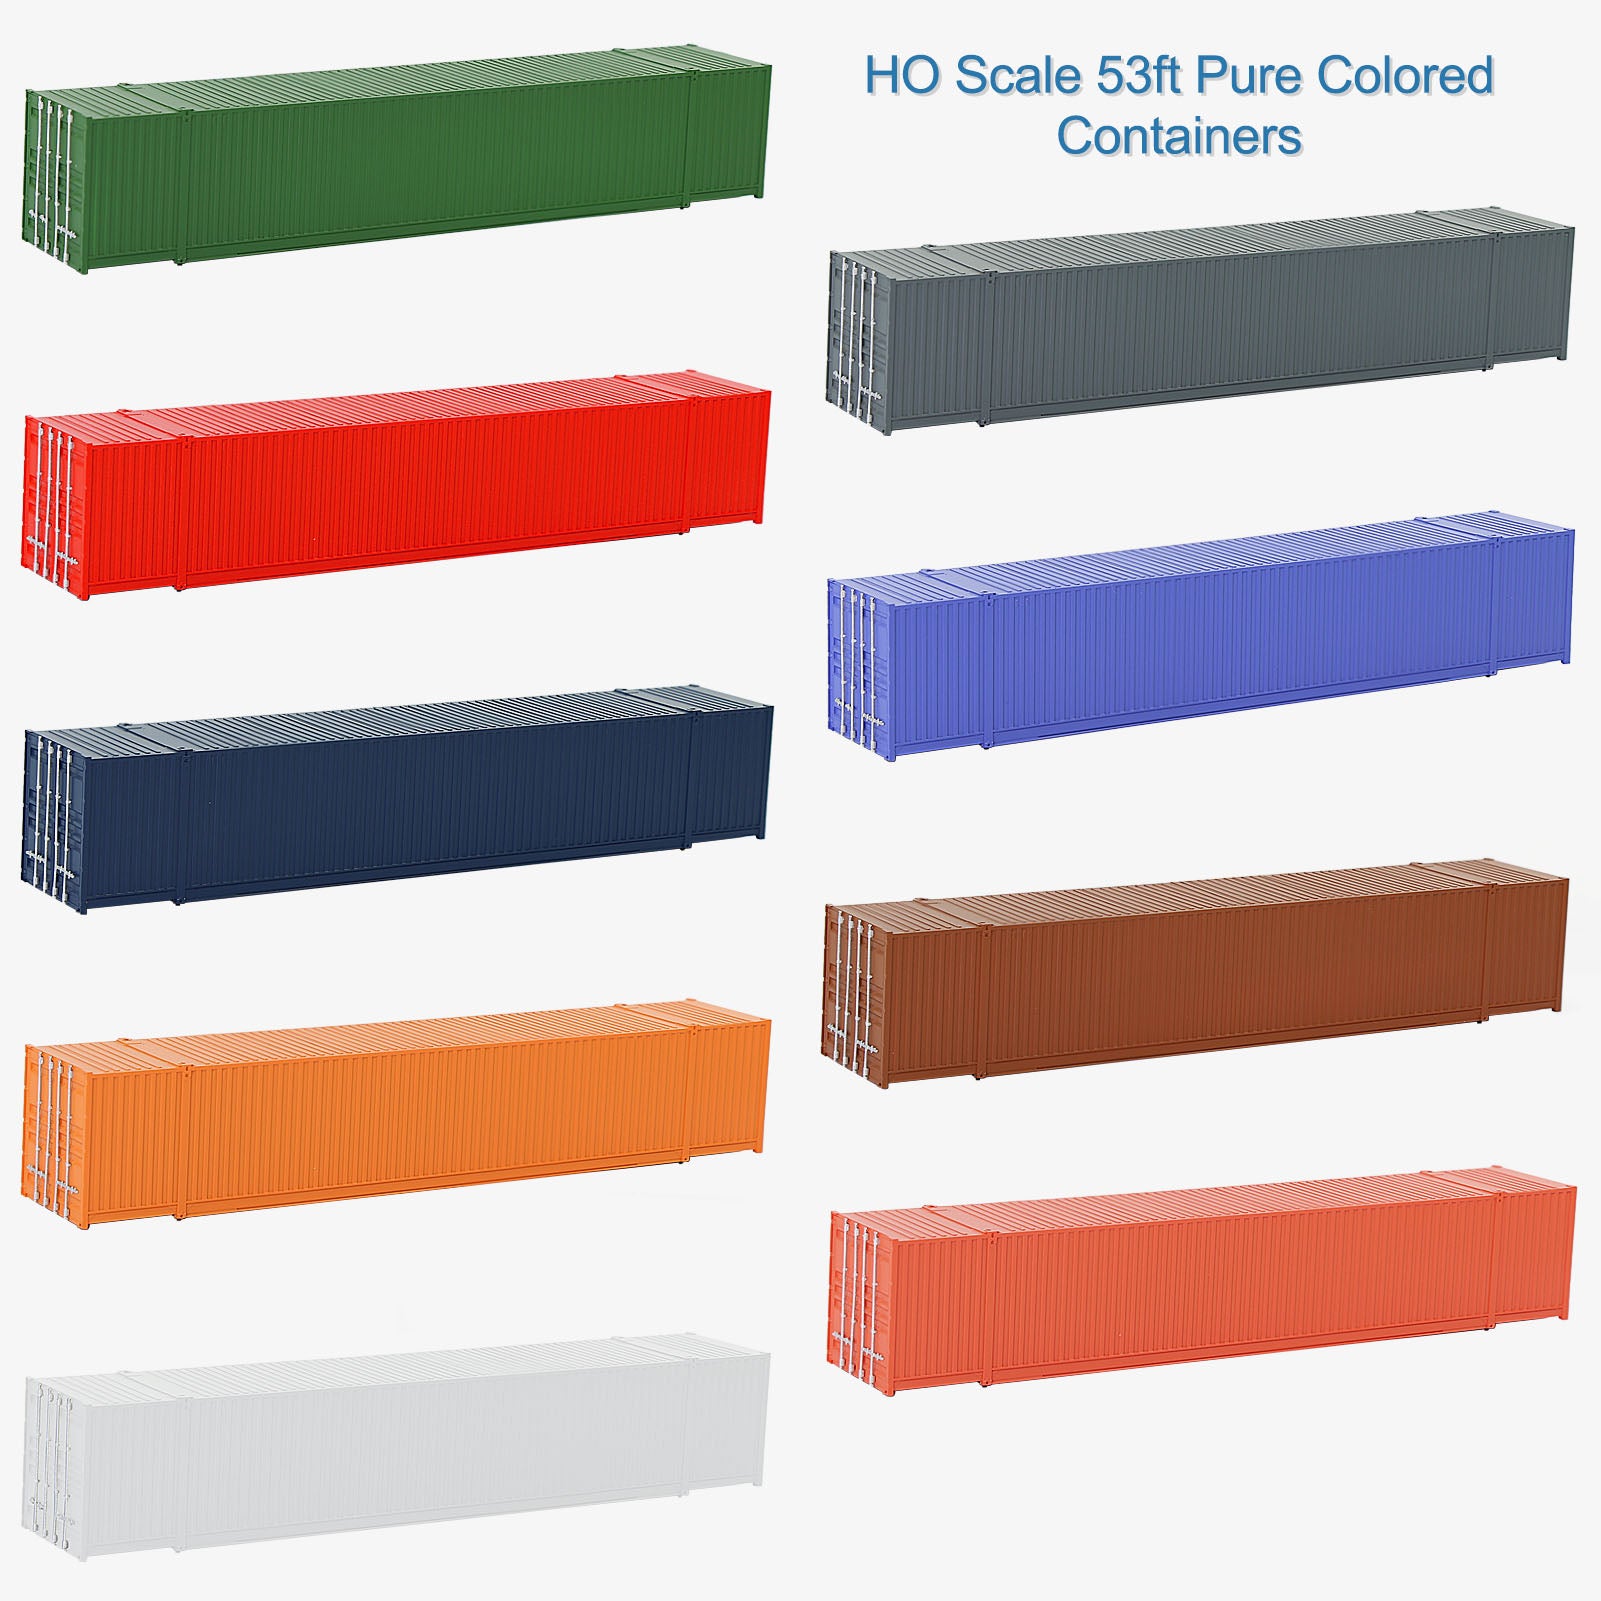 C8753 9pcs HO Scale 1:87 53ft Pure Color Shipping Container